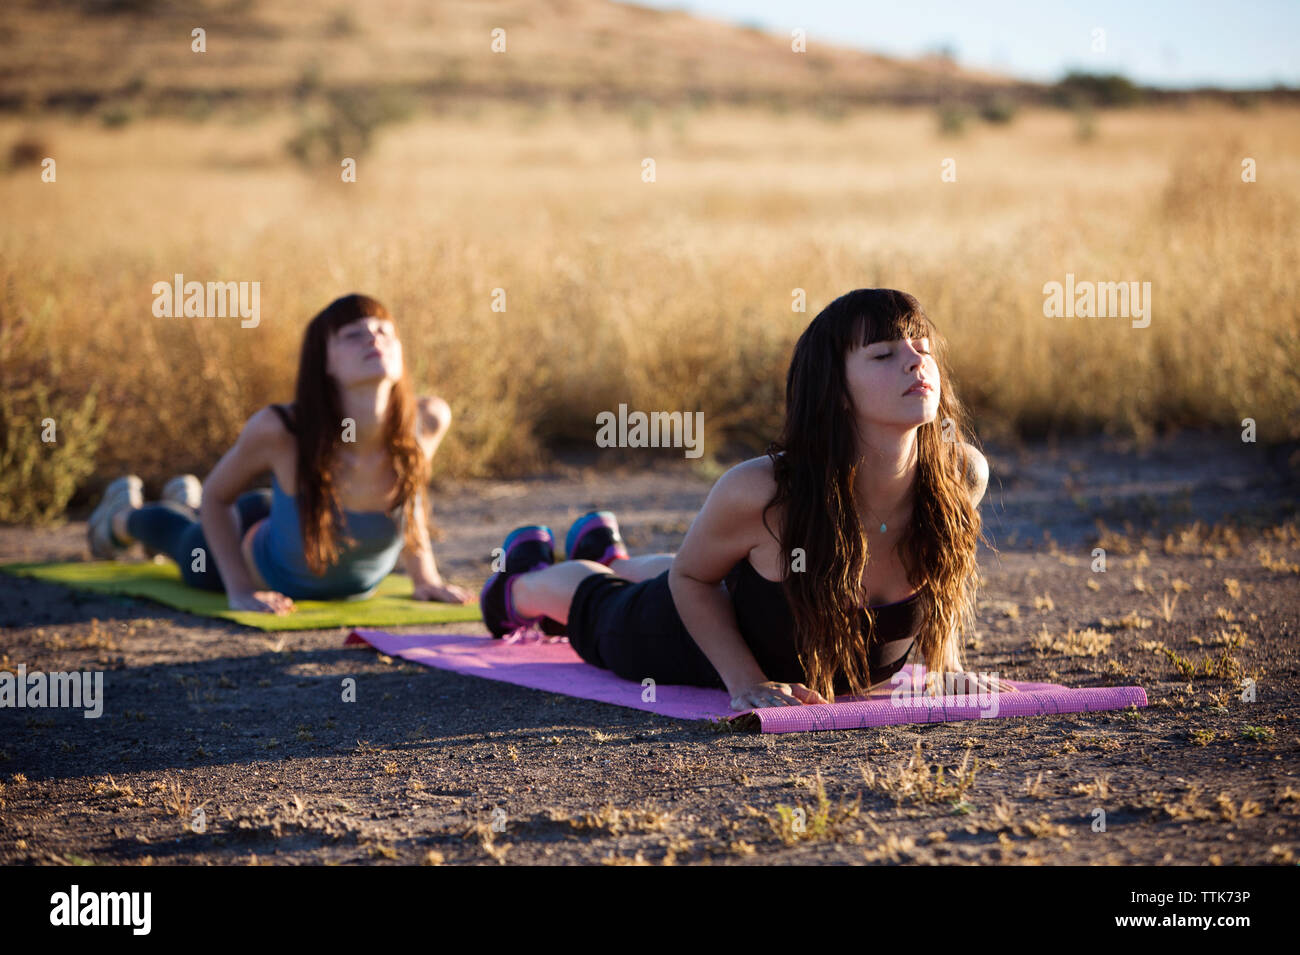 Young women practicing yoga on exercise mat in field Stock Photo